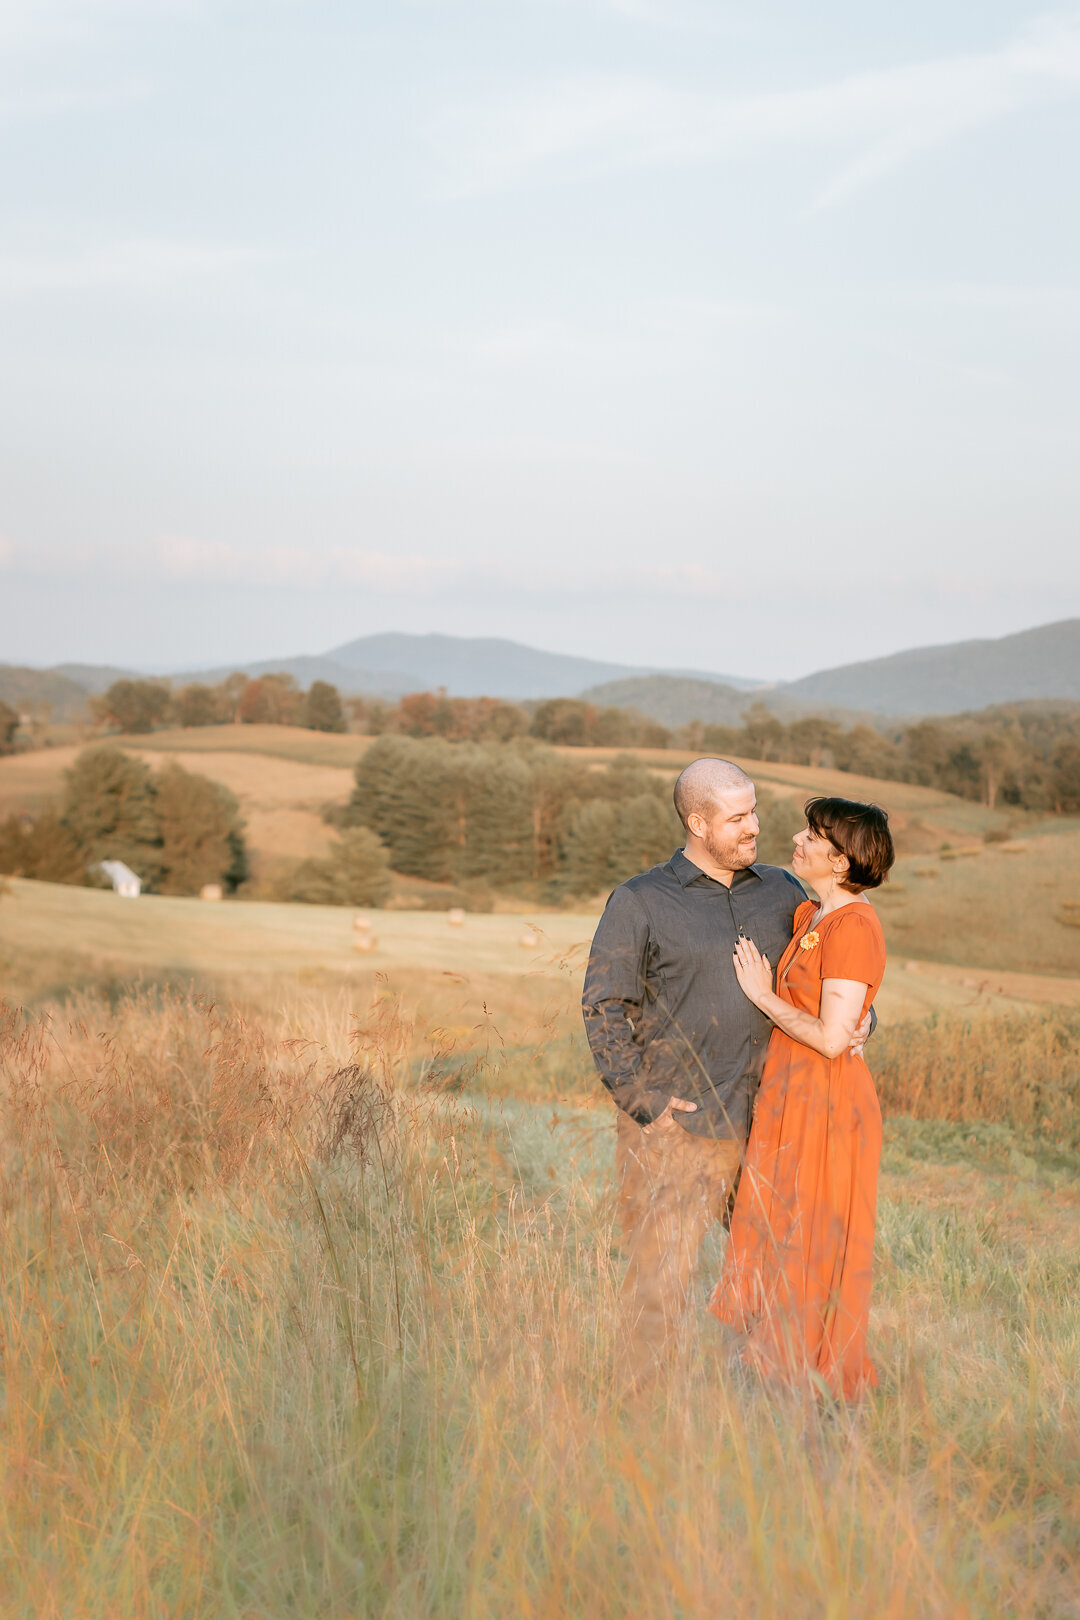 2022_family_rustic-fall-photosession_sinkland-farms_blue-ridge-mountains_new-river-valley_rustic-fall-9159